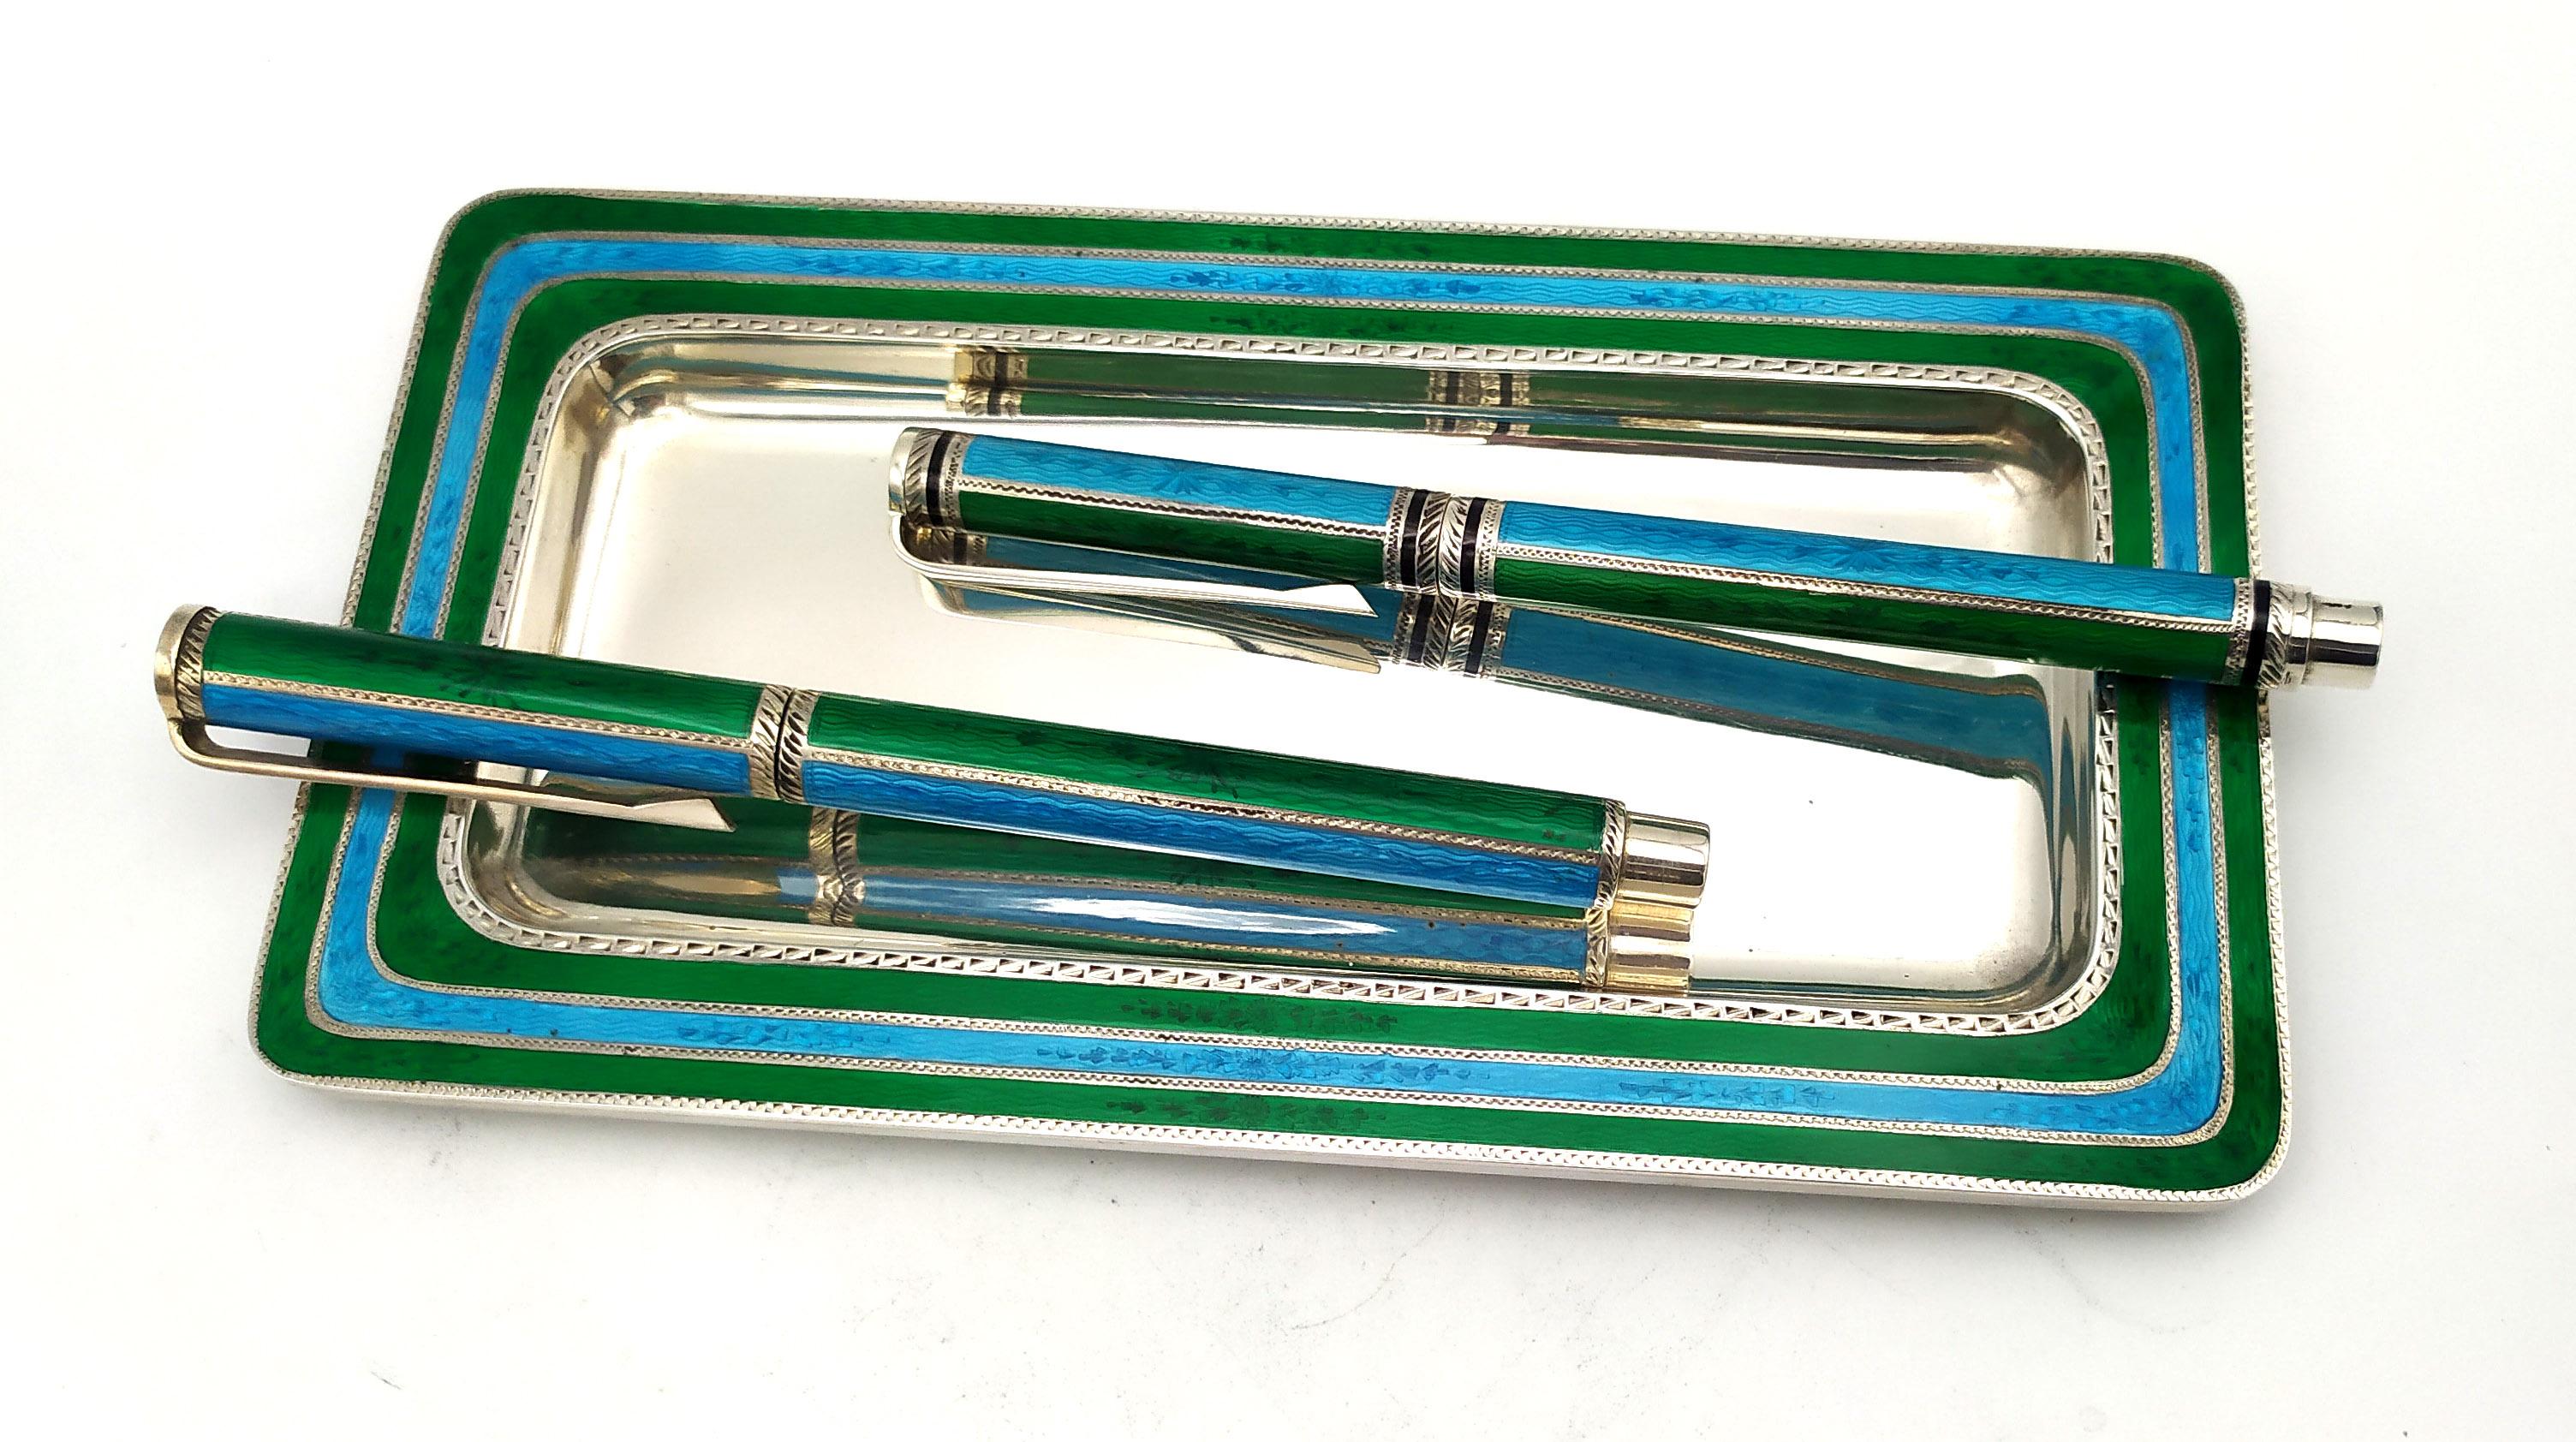 Rectangular tray with rounded corners in 925/1000 sterling silver with translucent fired enamels with two-tone stripes on guilloche and hand engravings, cm. 9.5 x 18. For fountain pen (4568-5201) with 18k gold nib and ink cartridge and for ballpoint